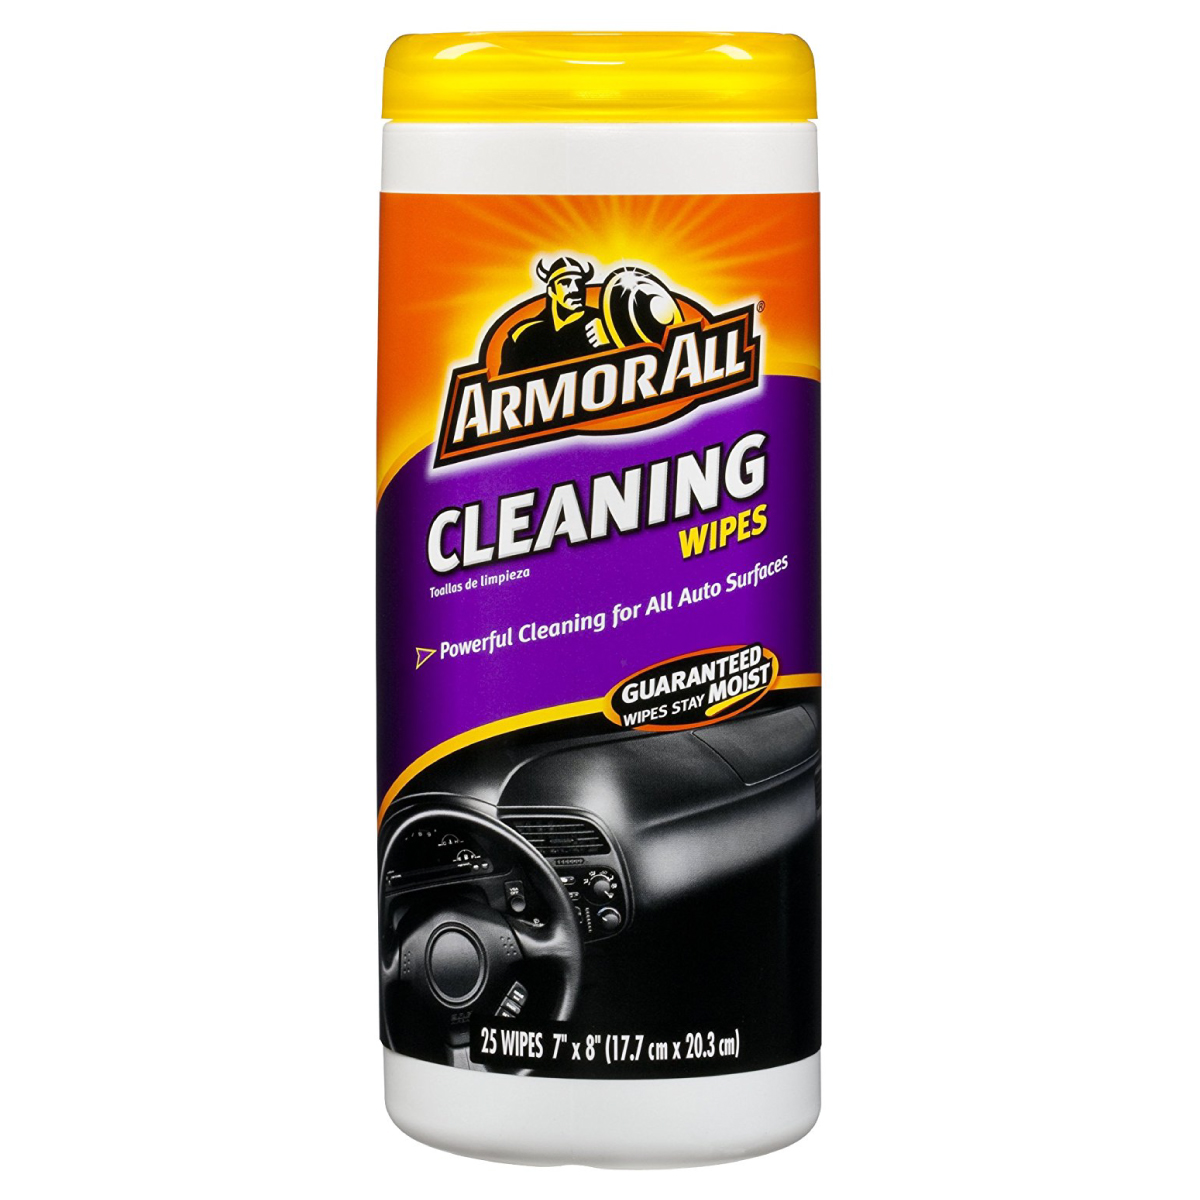 Cleaning Wipes Armor All